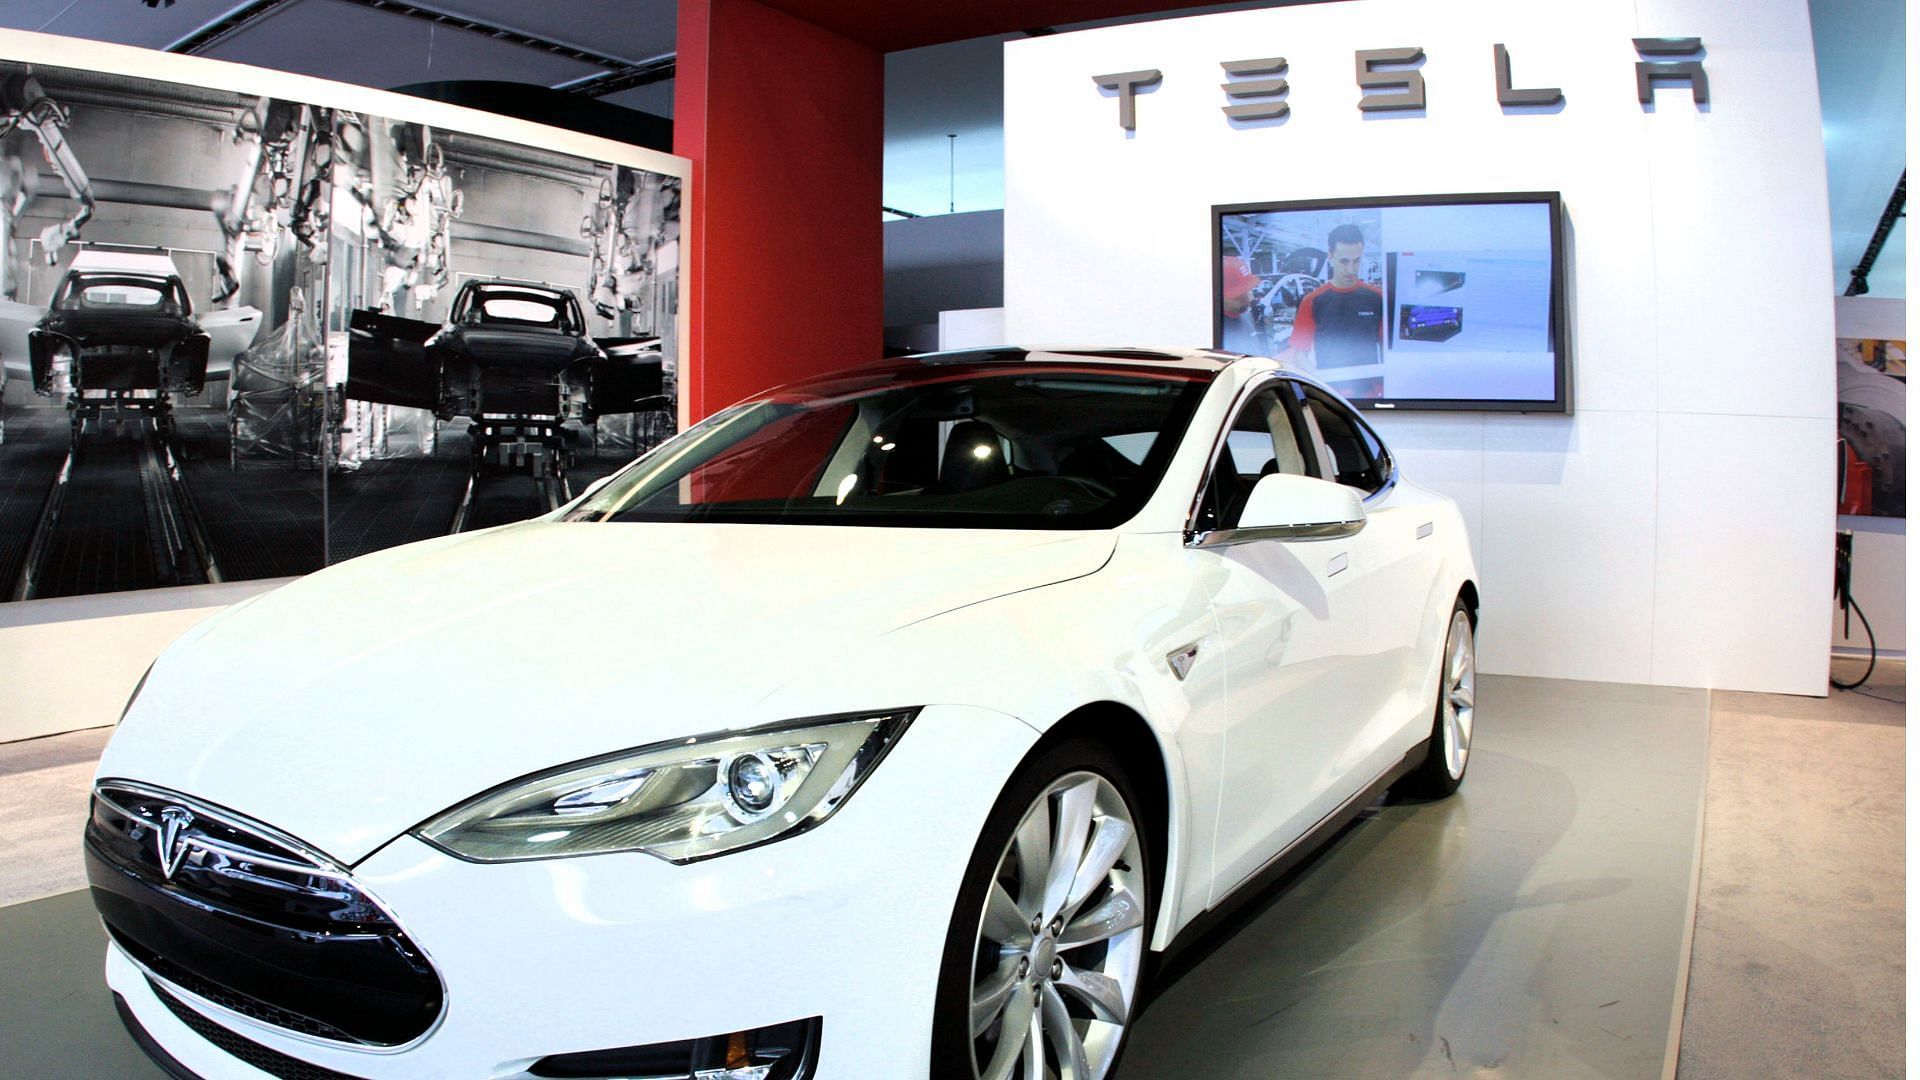 the recalled Tesla models include 2016-2023 Model S, Model X, 2017-2023 Model 3, and 2020-2023 Model Y vehicles (Image via Bill Pugliano/Getty Images)